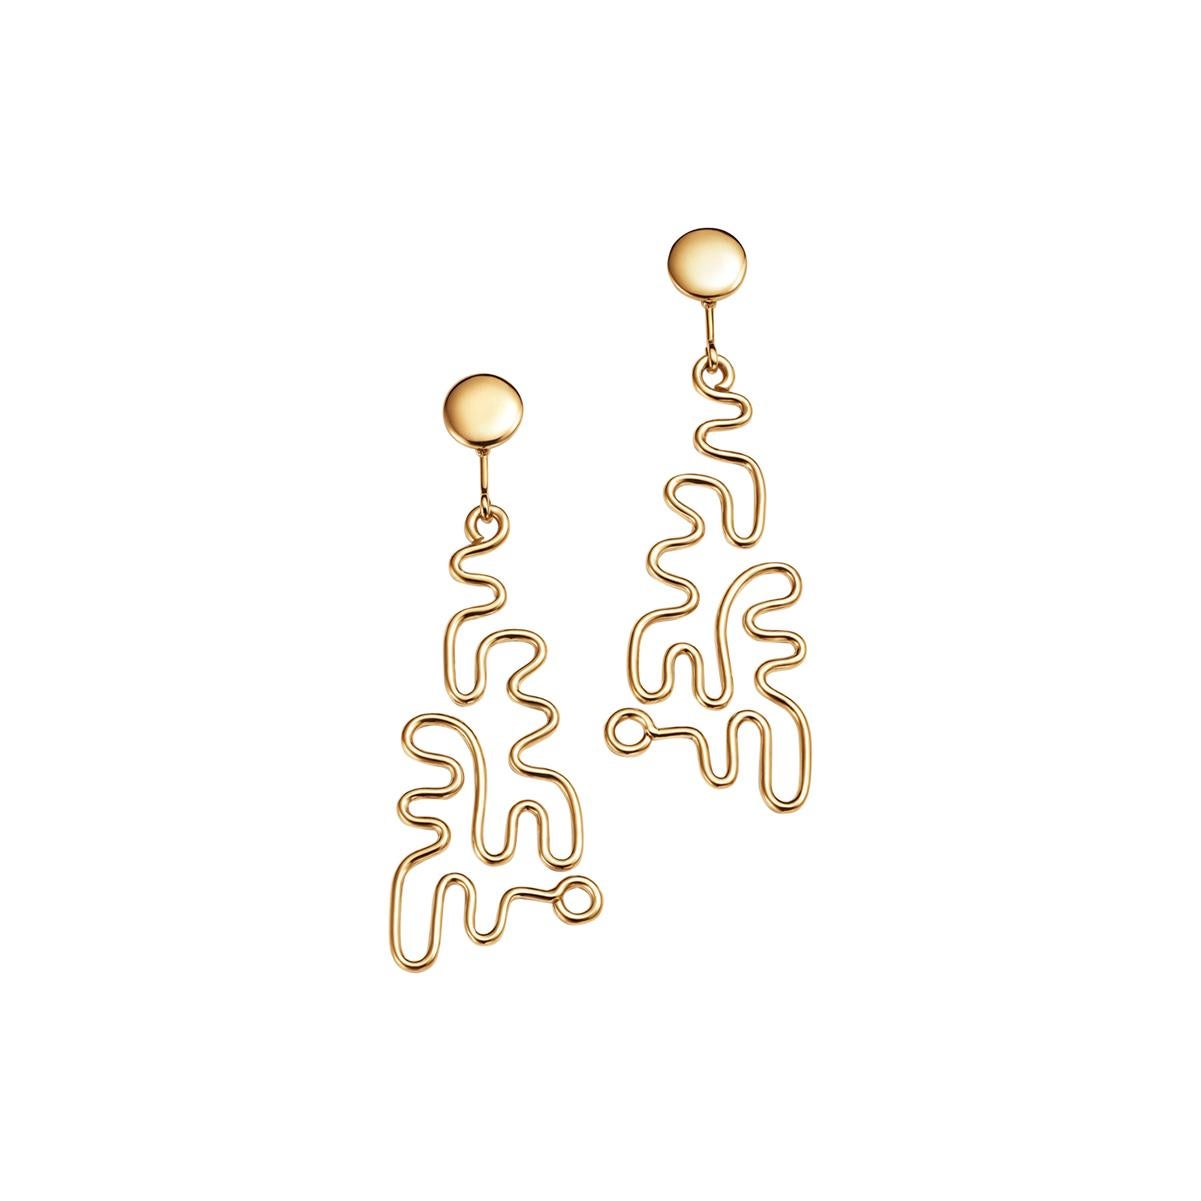 18kt Fairmined Ecological Yellow Gold Milton Cavagnaro Puzzle Earrings For Sale